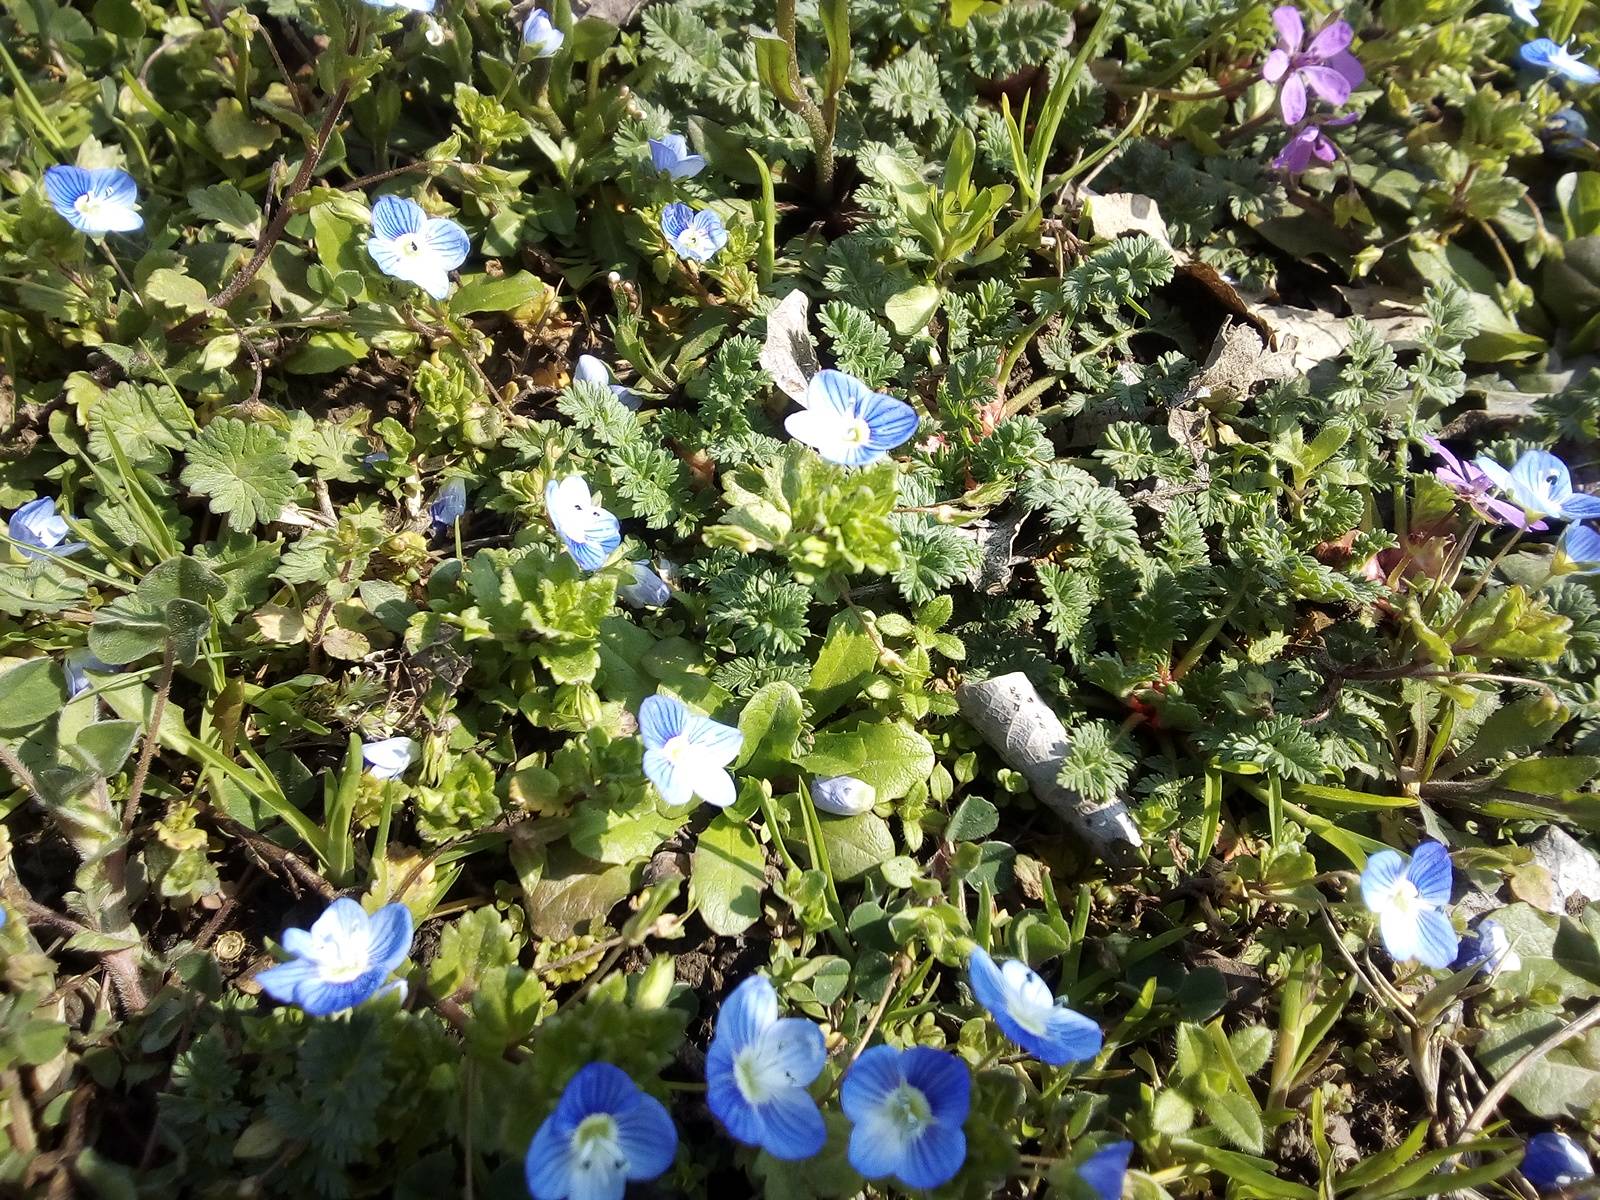 identification - What is this short plant with little blue flowers ...